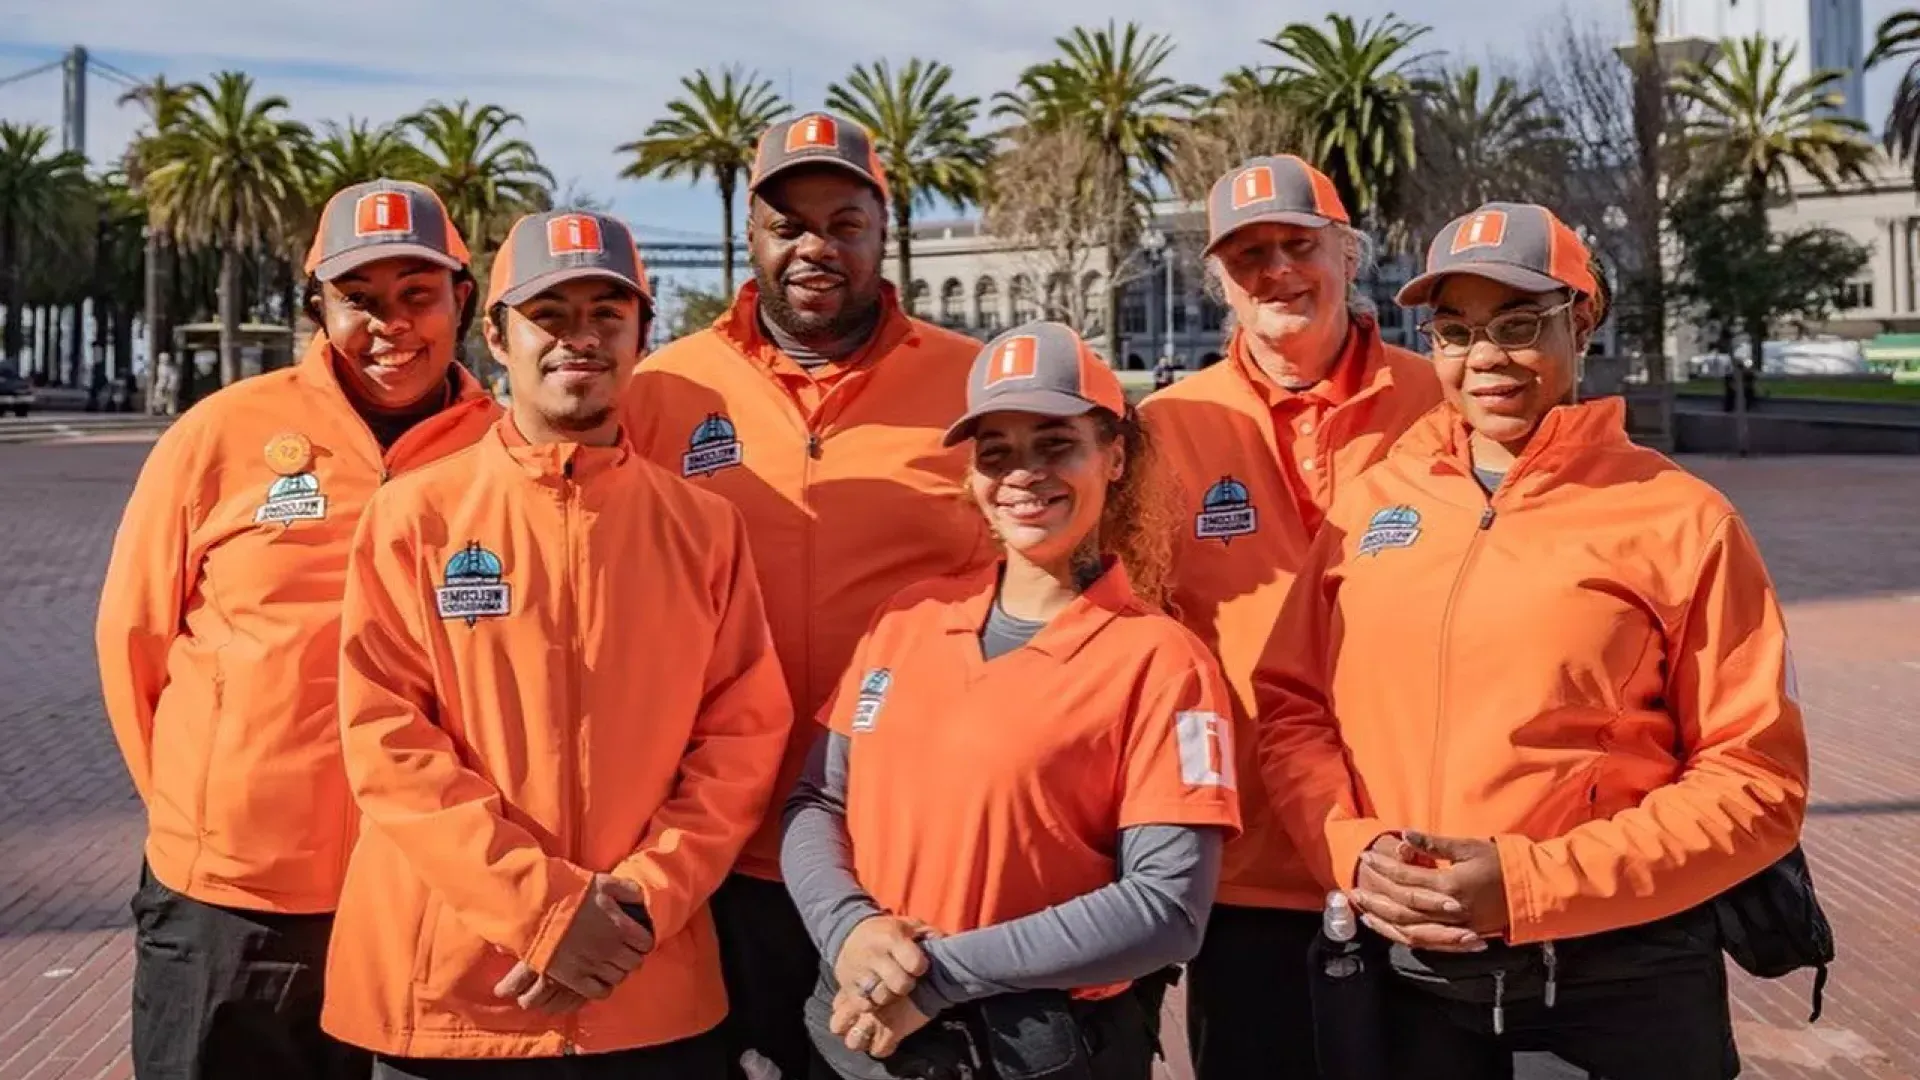 San Francisco's Welcome Ambassadors prepare to greet visitors at the Ferry Building.